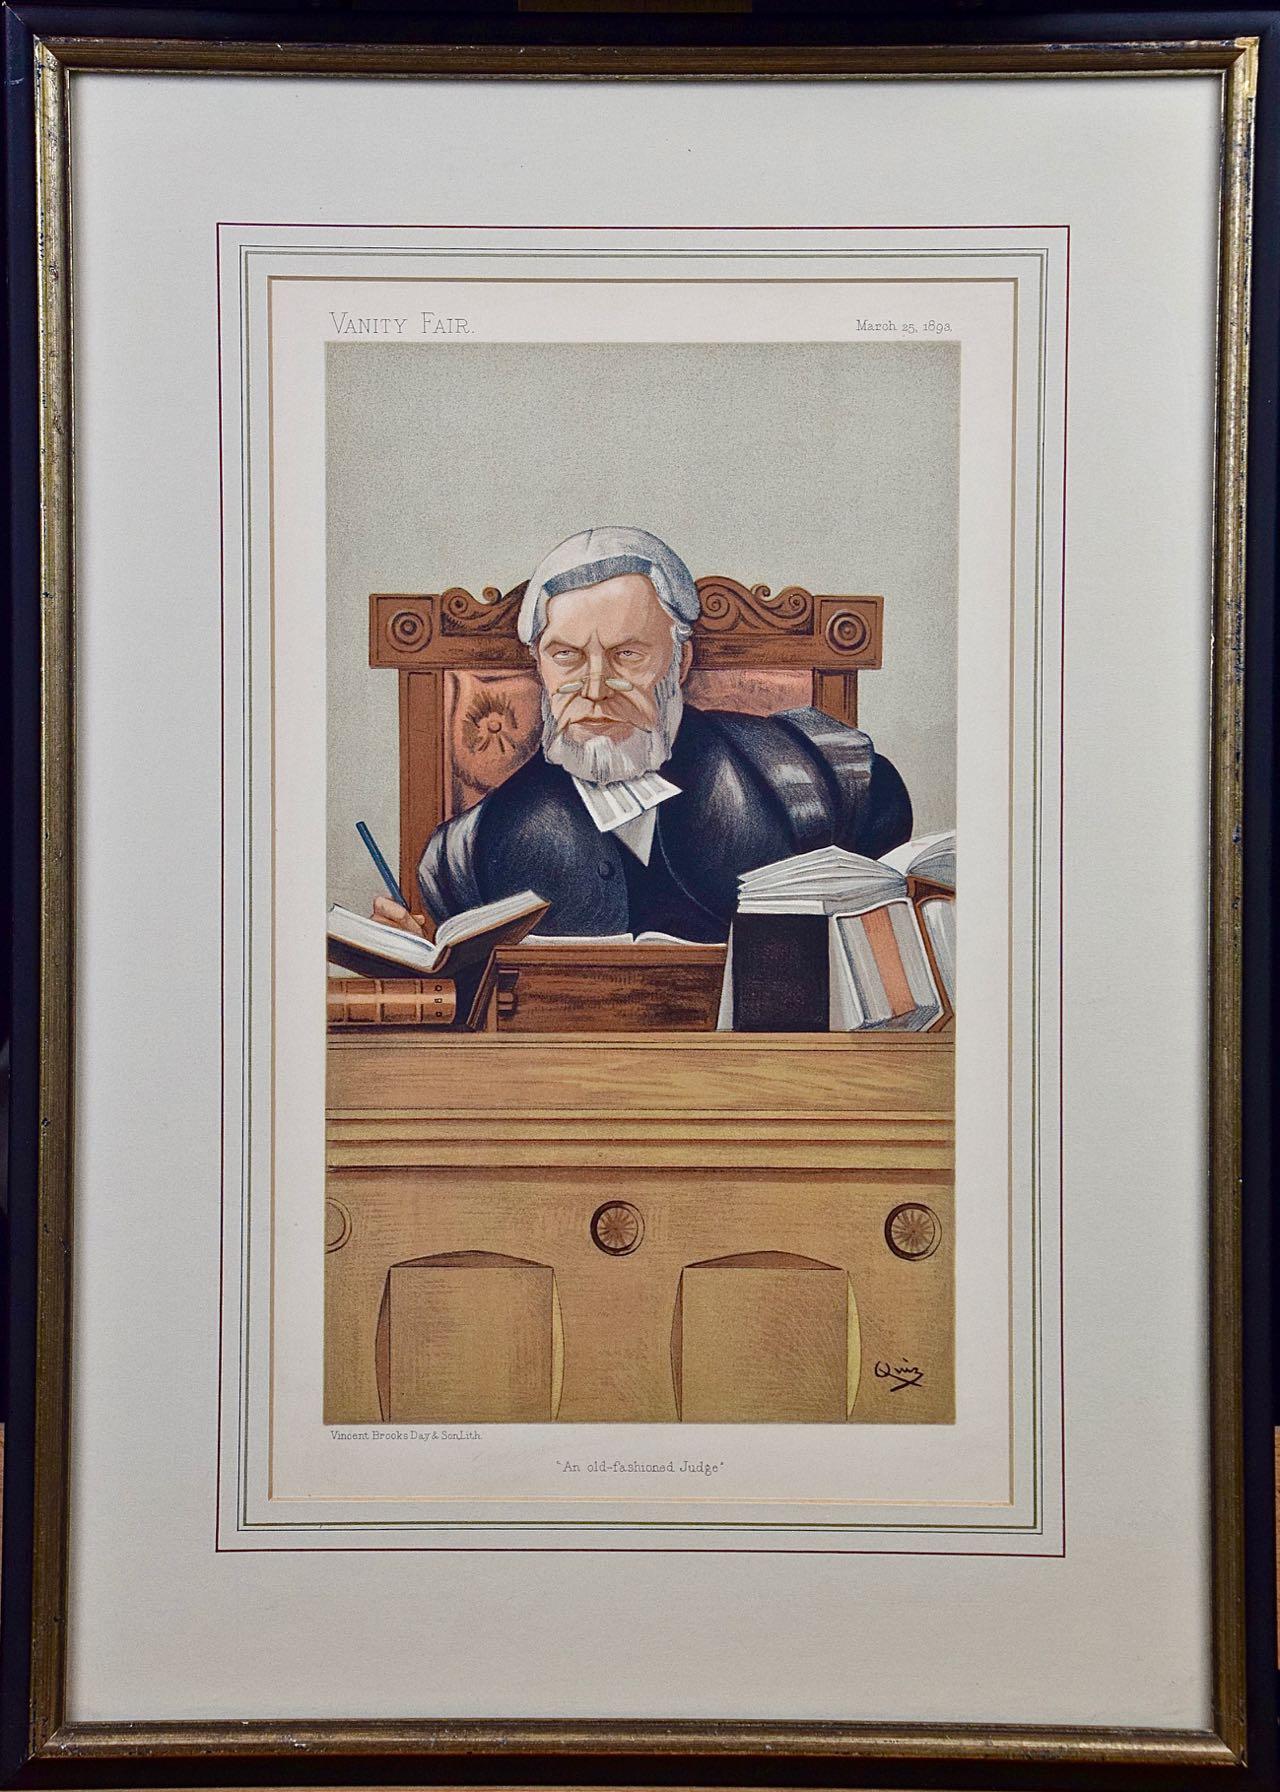 Sir Leslie Ward Figurative Print - Original 19th C. Vanity Fair Caricature of "An Old Fashioned Judge", Henry Lopes